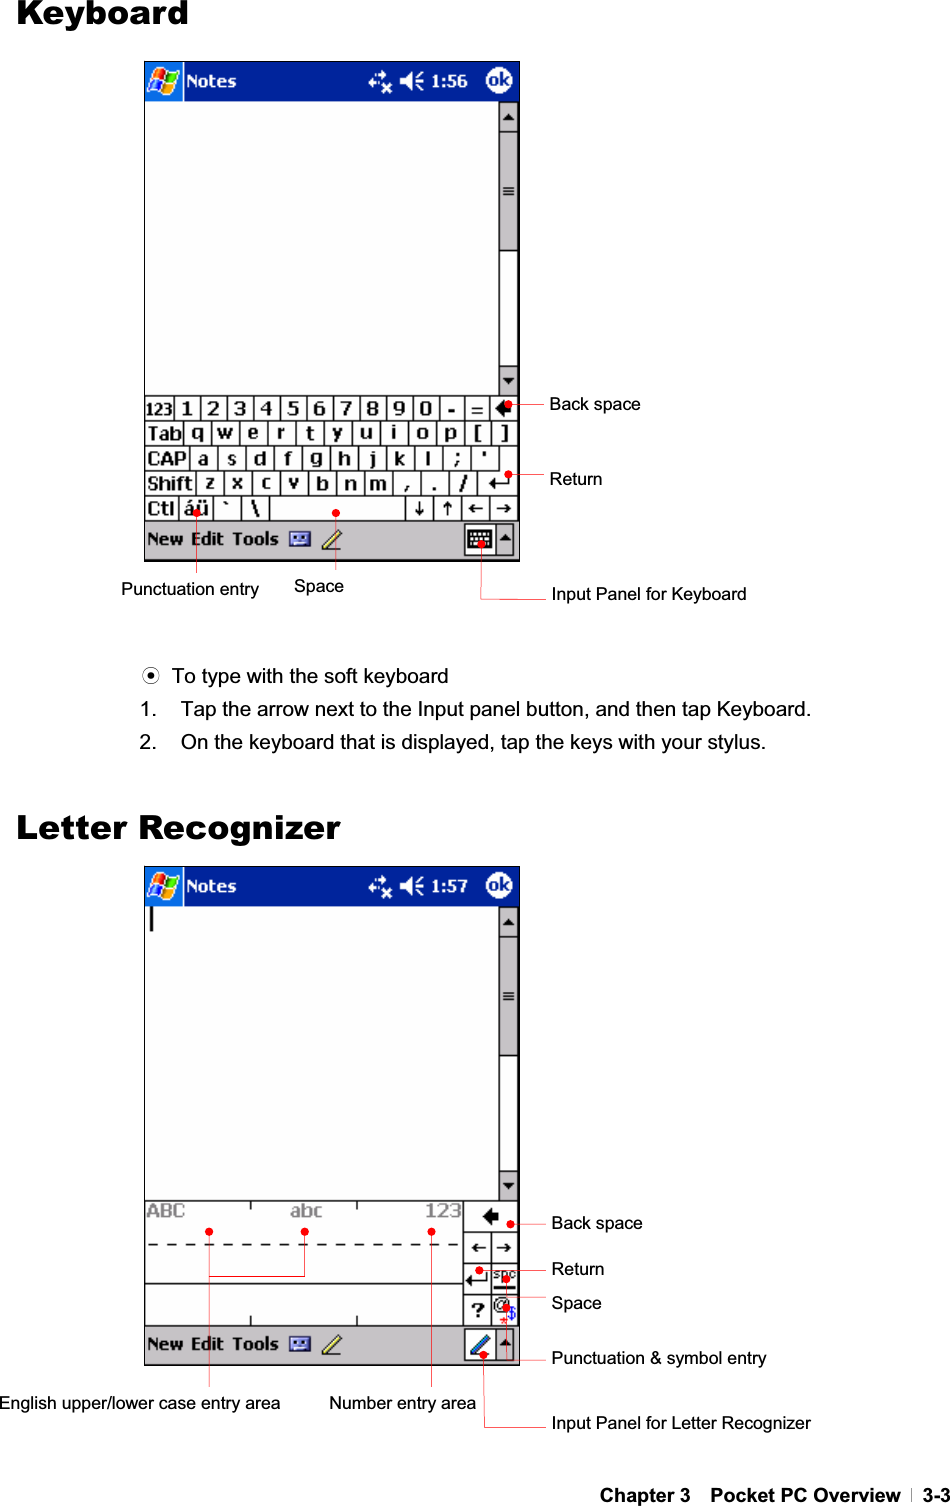 GChapter 3  Pocket PC Overview  3-3KeyboardGGGGGGGGGGGGGGGGGGGGGGGඝ  To type with the soft keyboard 1.  Tap the arrow next to the Input panel button, and then tap Keyboard. 2.  On the keyboard that is displayed, tap the keys with your stylus. GLetter RecognizerGGGGGGGGGGGGGGGGGGGGGGGBack space ReturnSpace Input Panel for Keyboard Back space ReturnSpacePunctuation &amp; symbol entry Number entry areaEnglish upper/lower case entry area Input Panel for Letter Recognizer Punctuation entry 